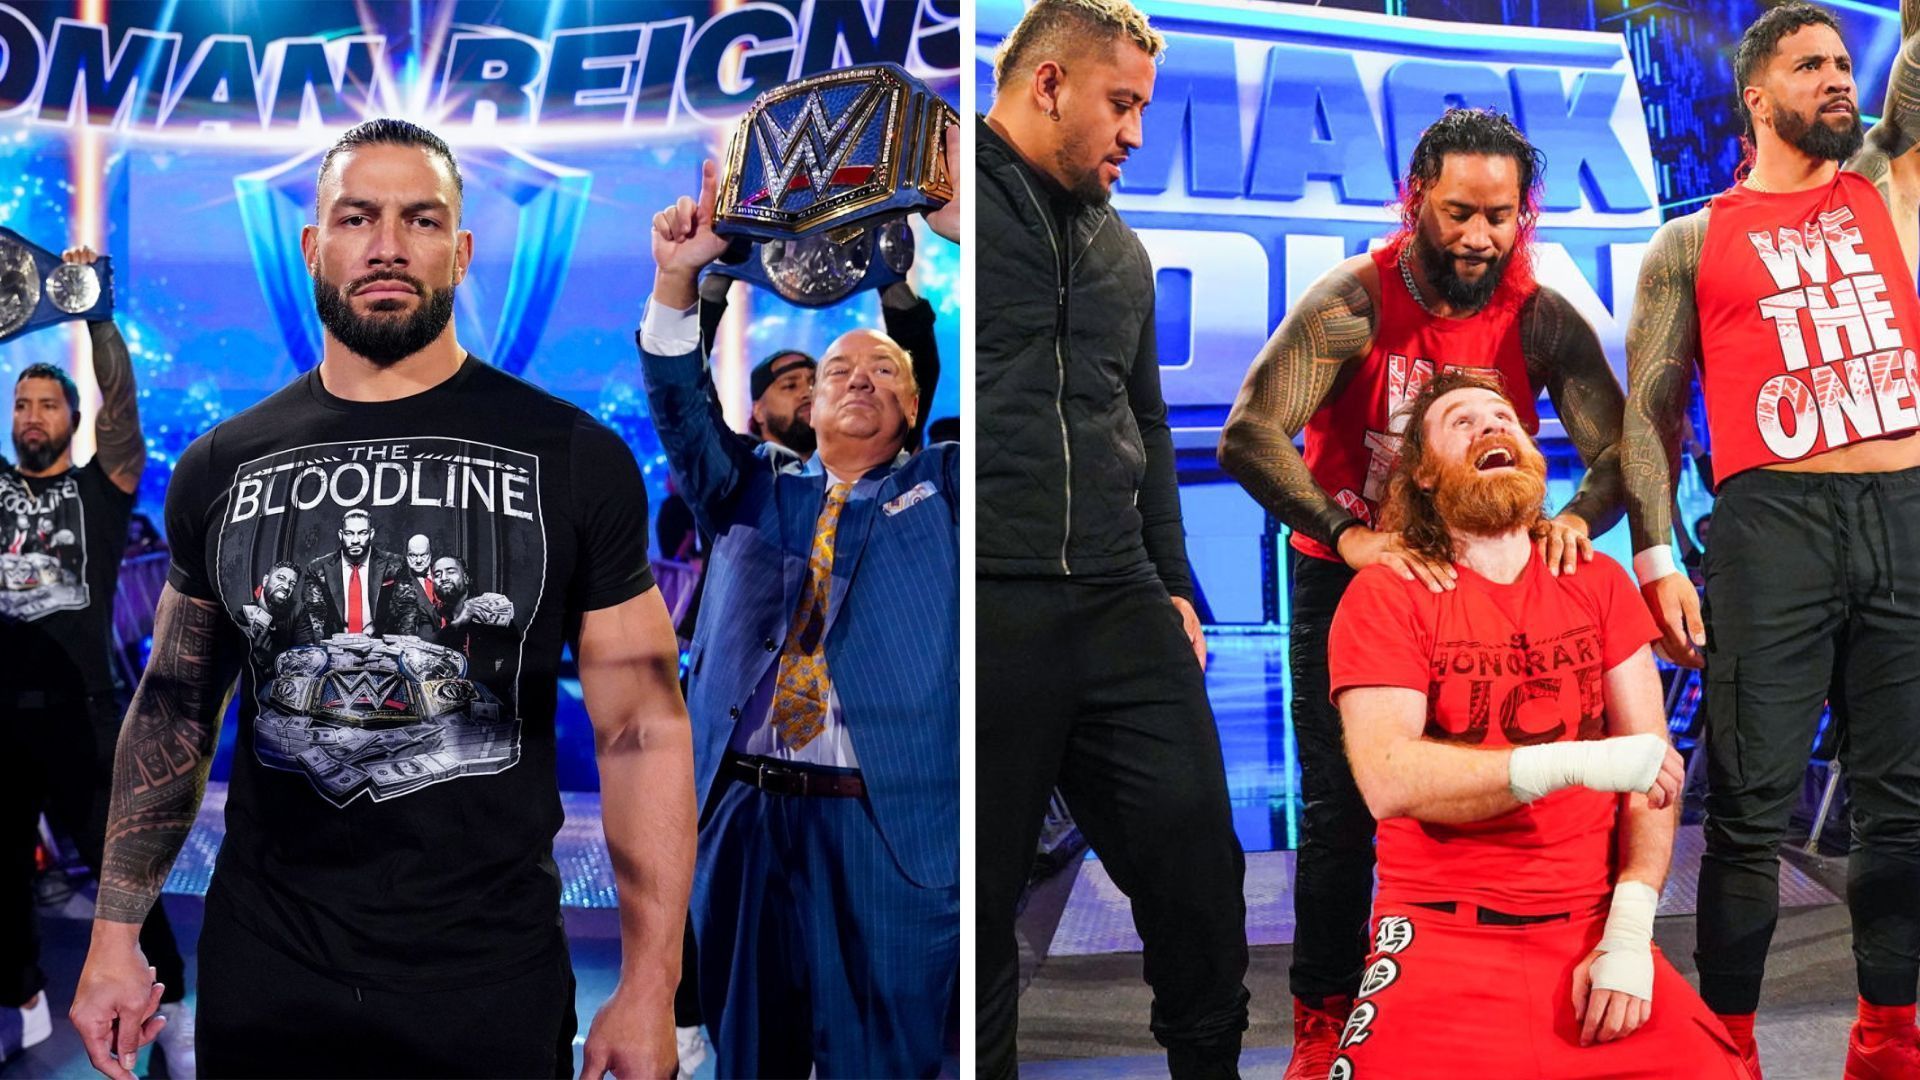 The Bloodline are the most dominant faction in WWE